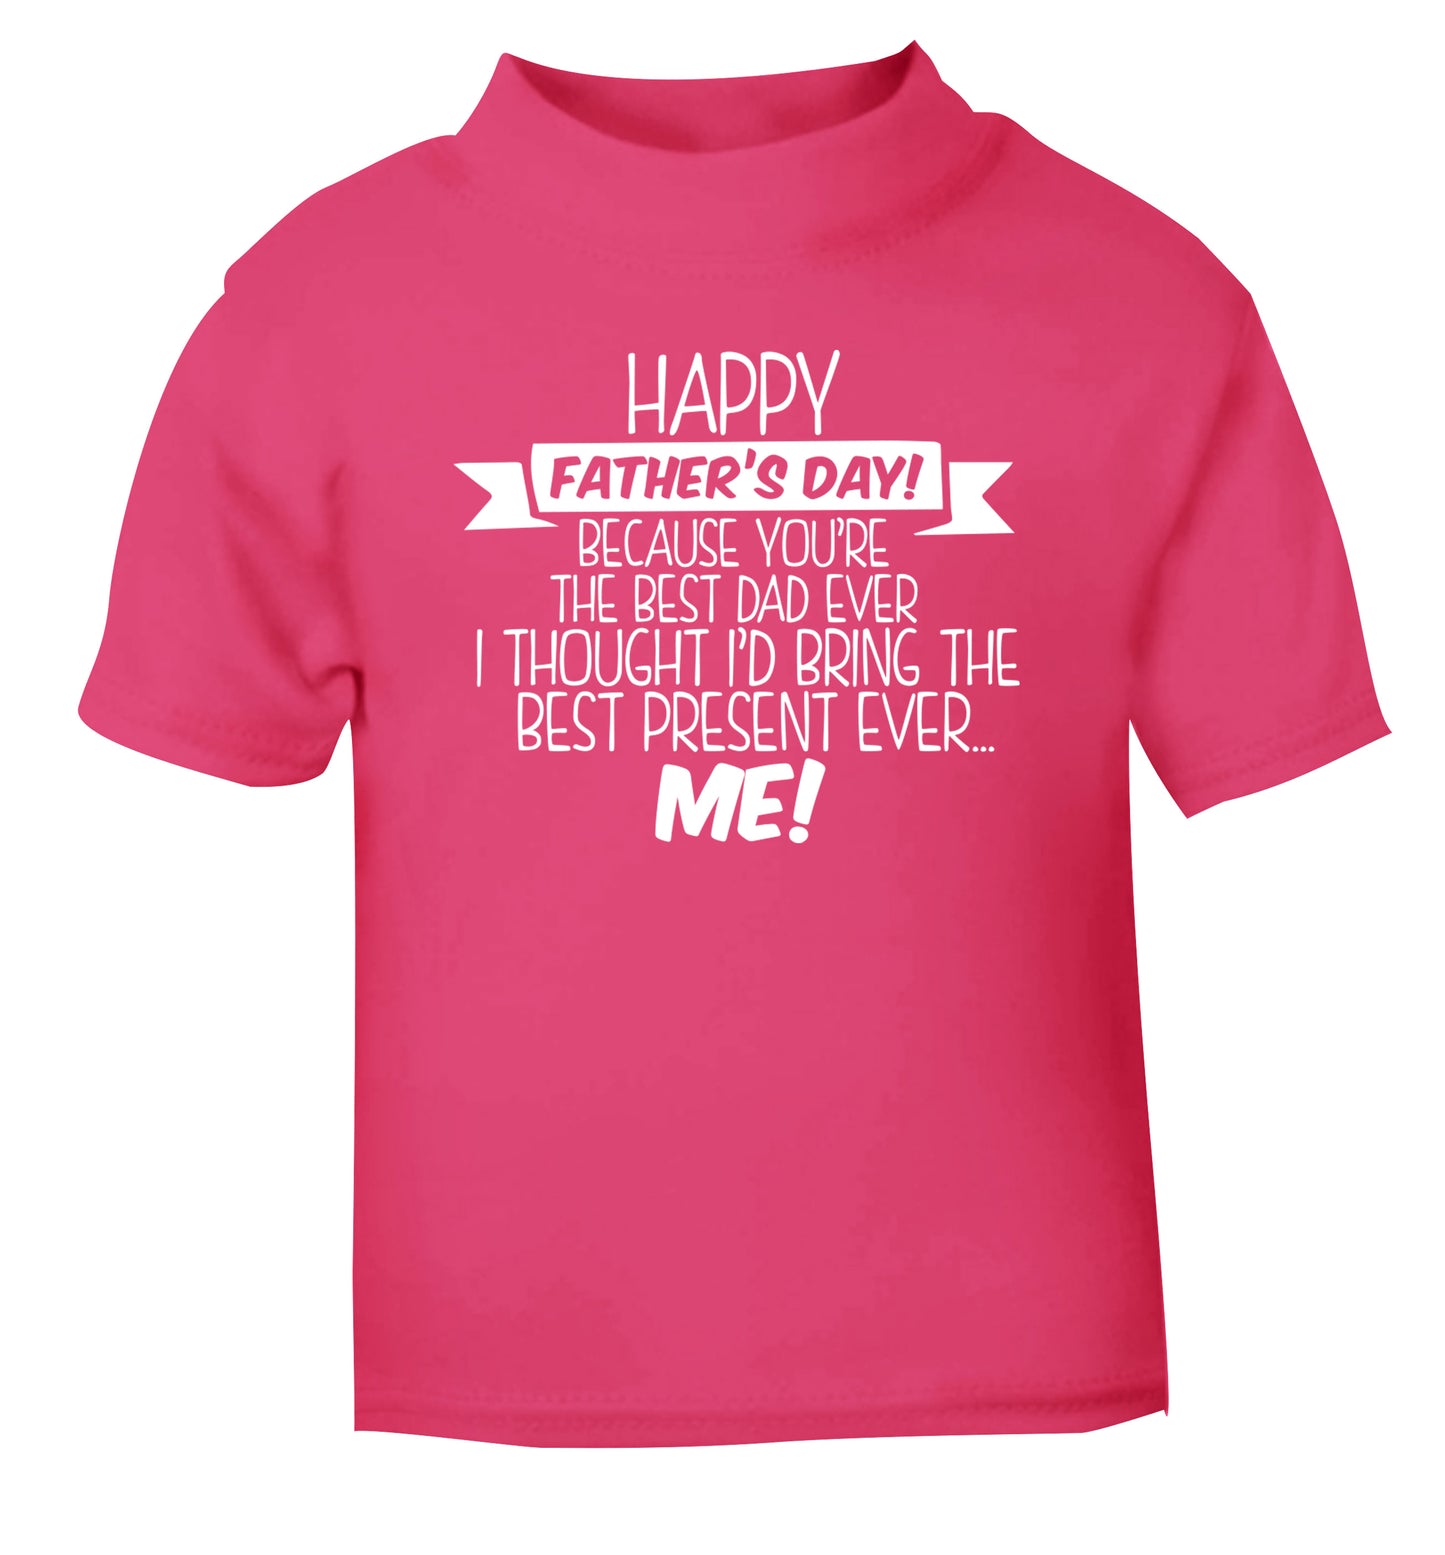 Happy Father's day, because you're the best dad ever I thought I'd bring the best present ever...me! pink Baby Toddler Tshirt 2 Years